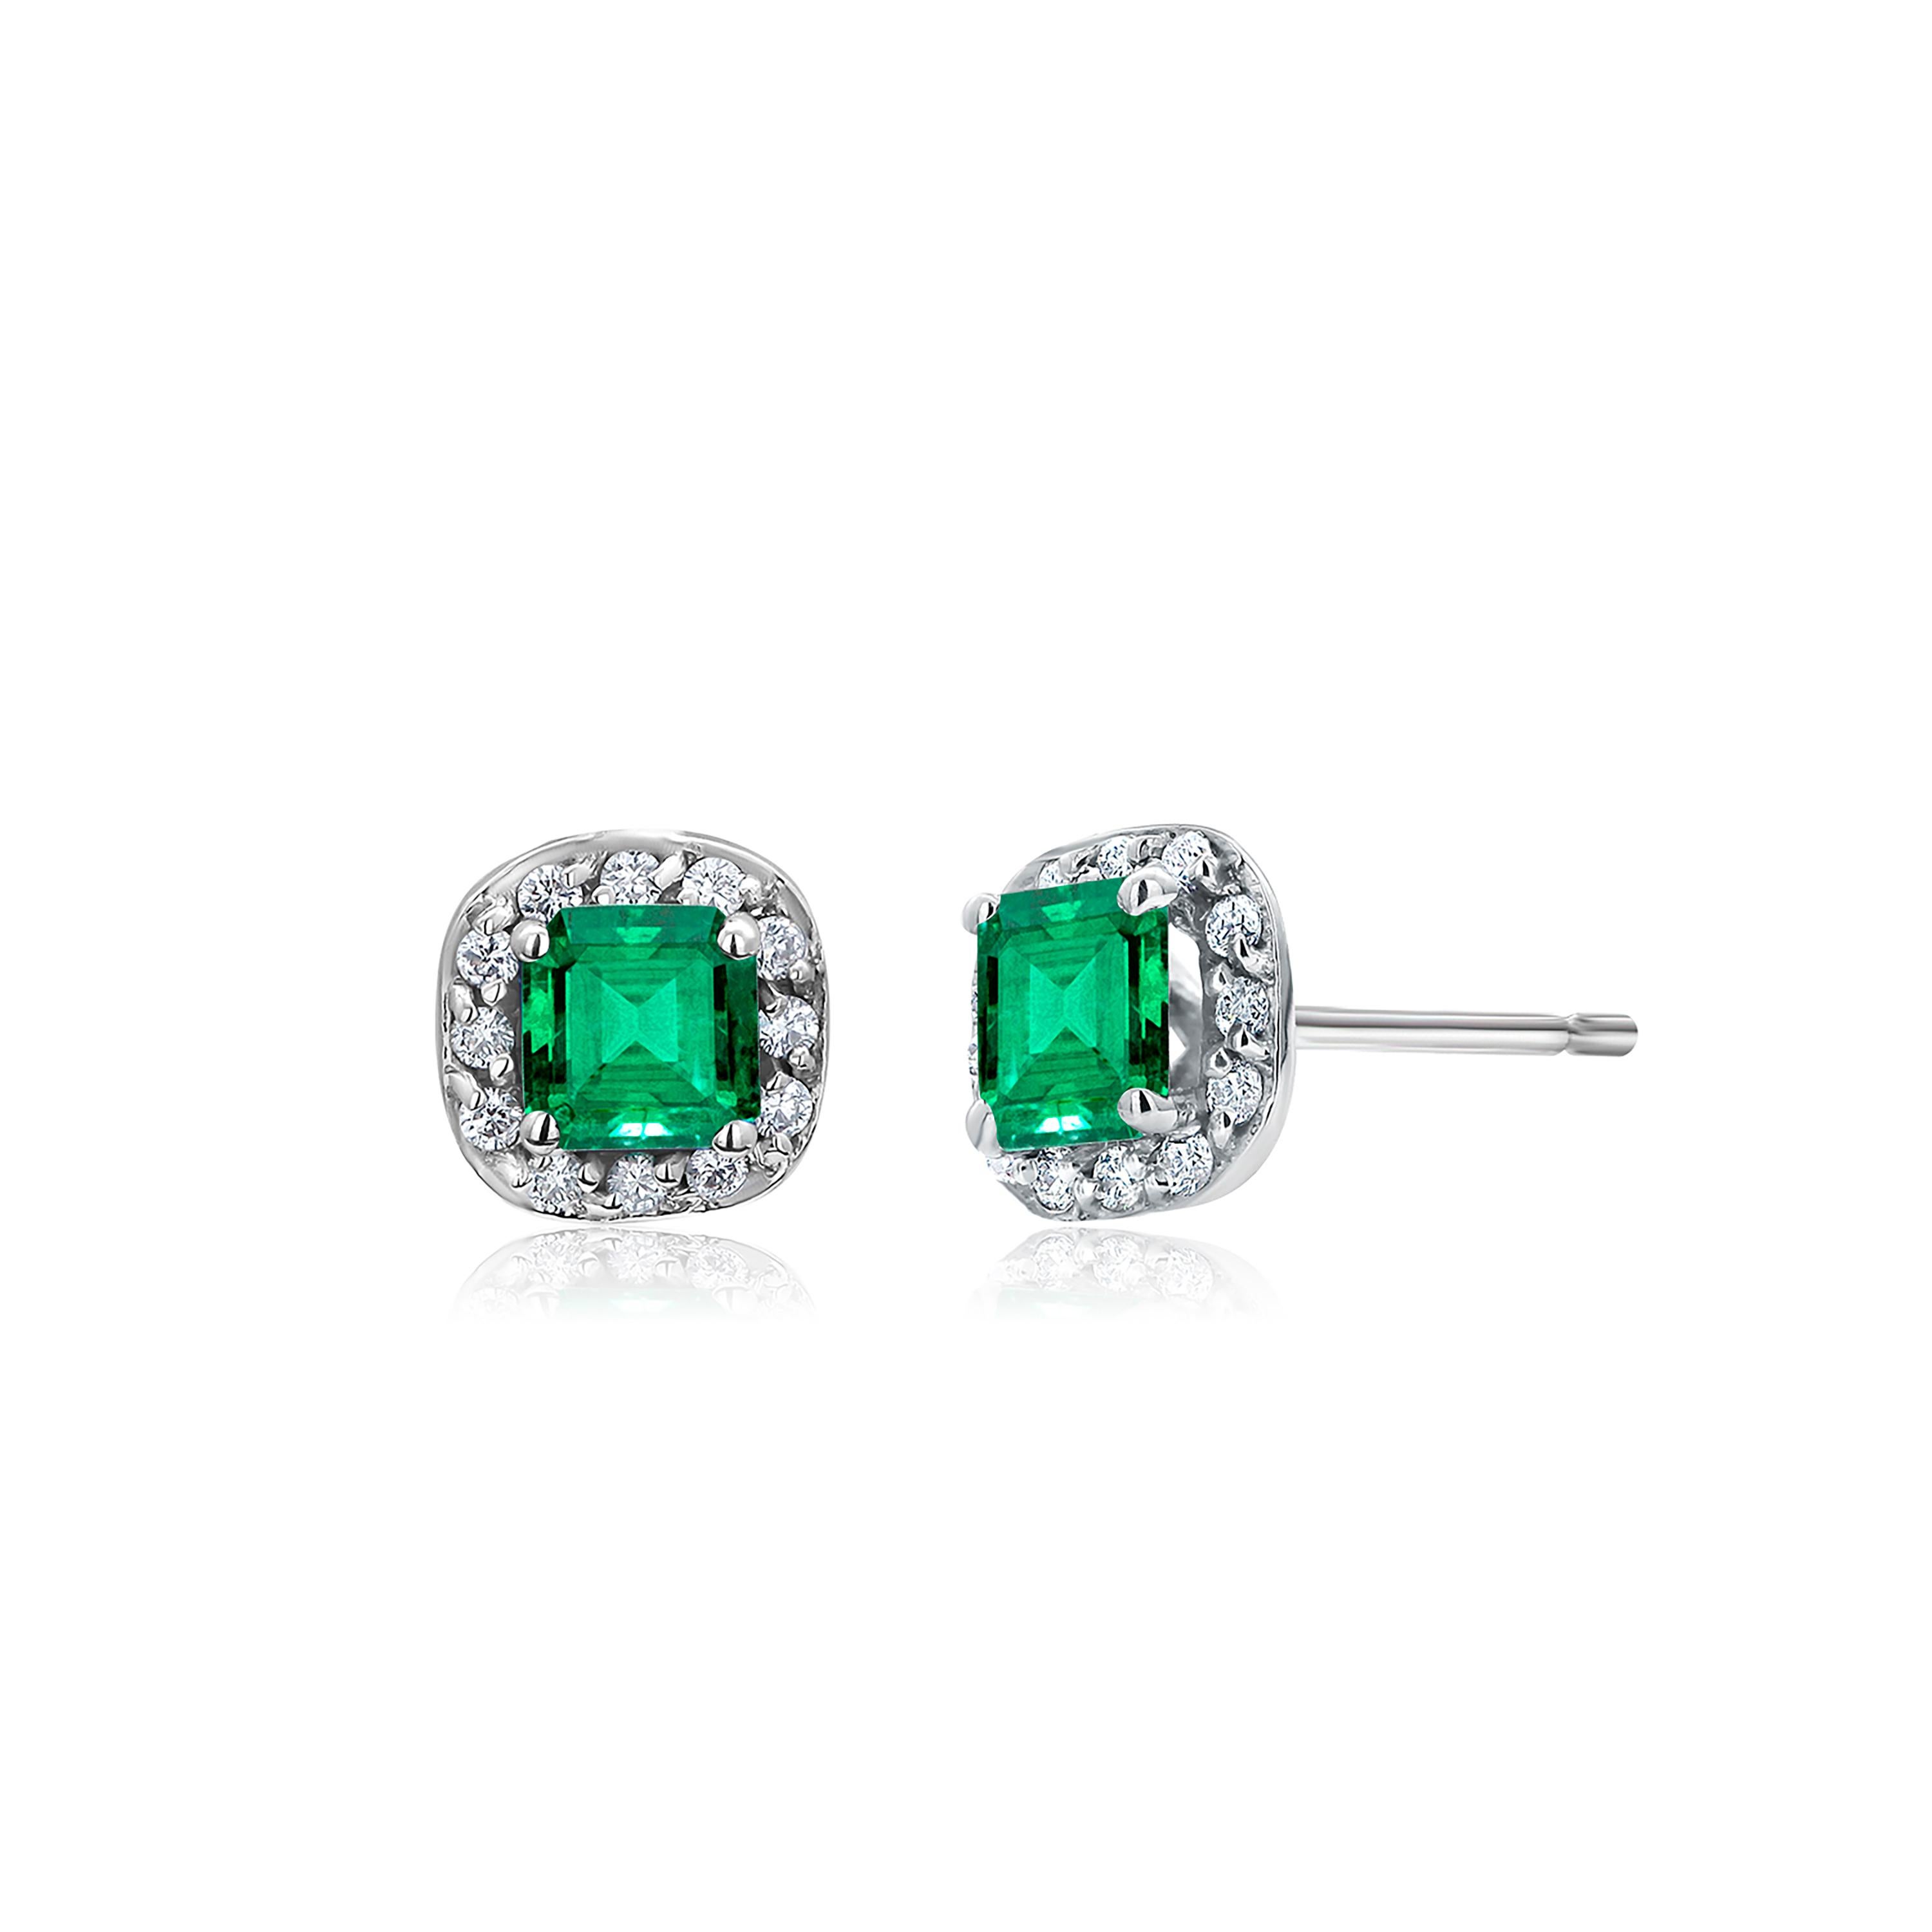 Emerald Cut Emerald and Diamond White Gold Square Shaped Stud Earrings